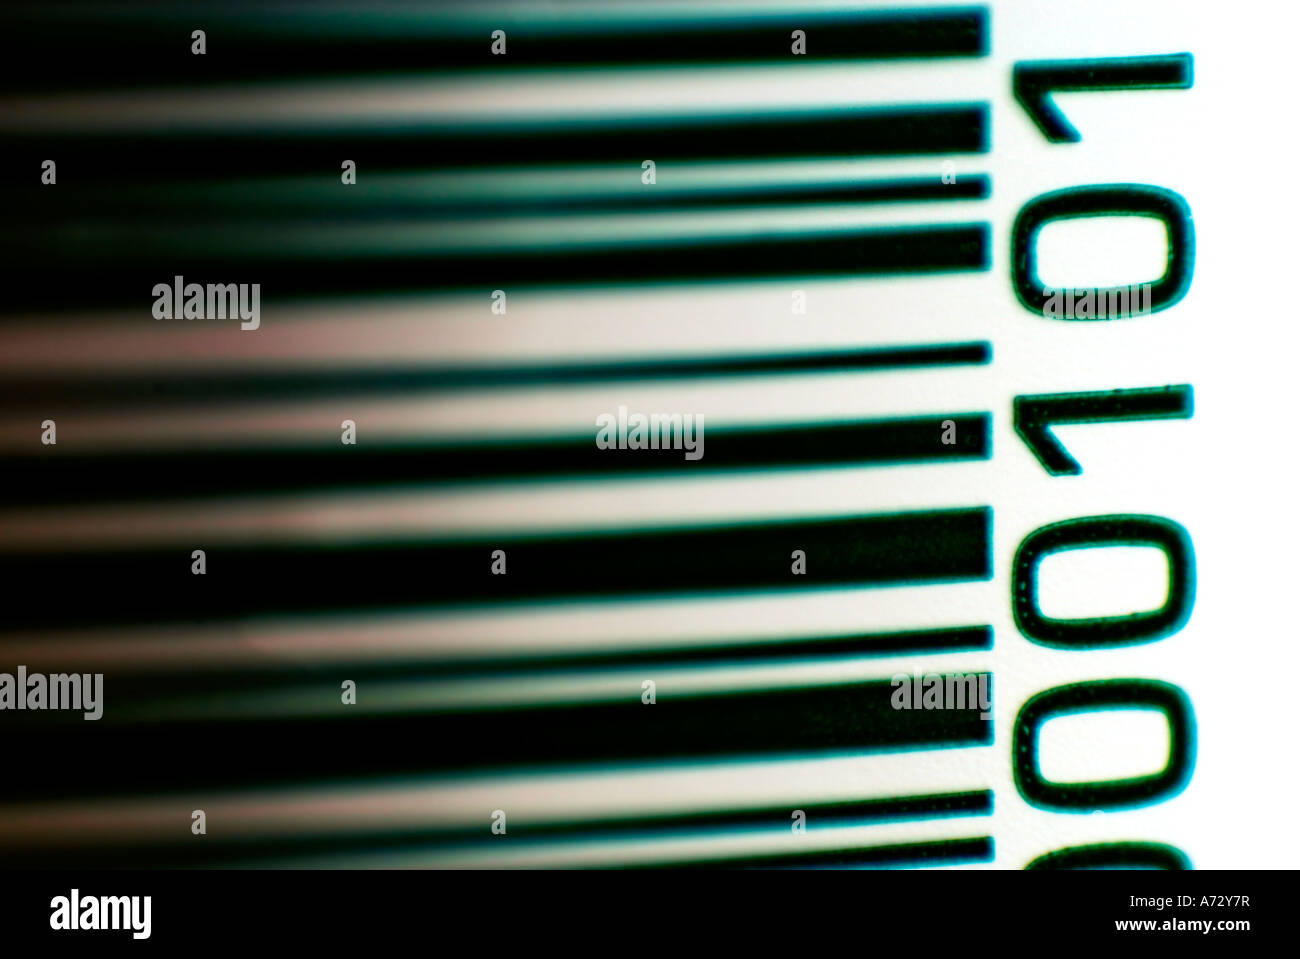 Digital bar-code with 0's and 1's. Stock Photo